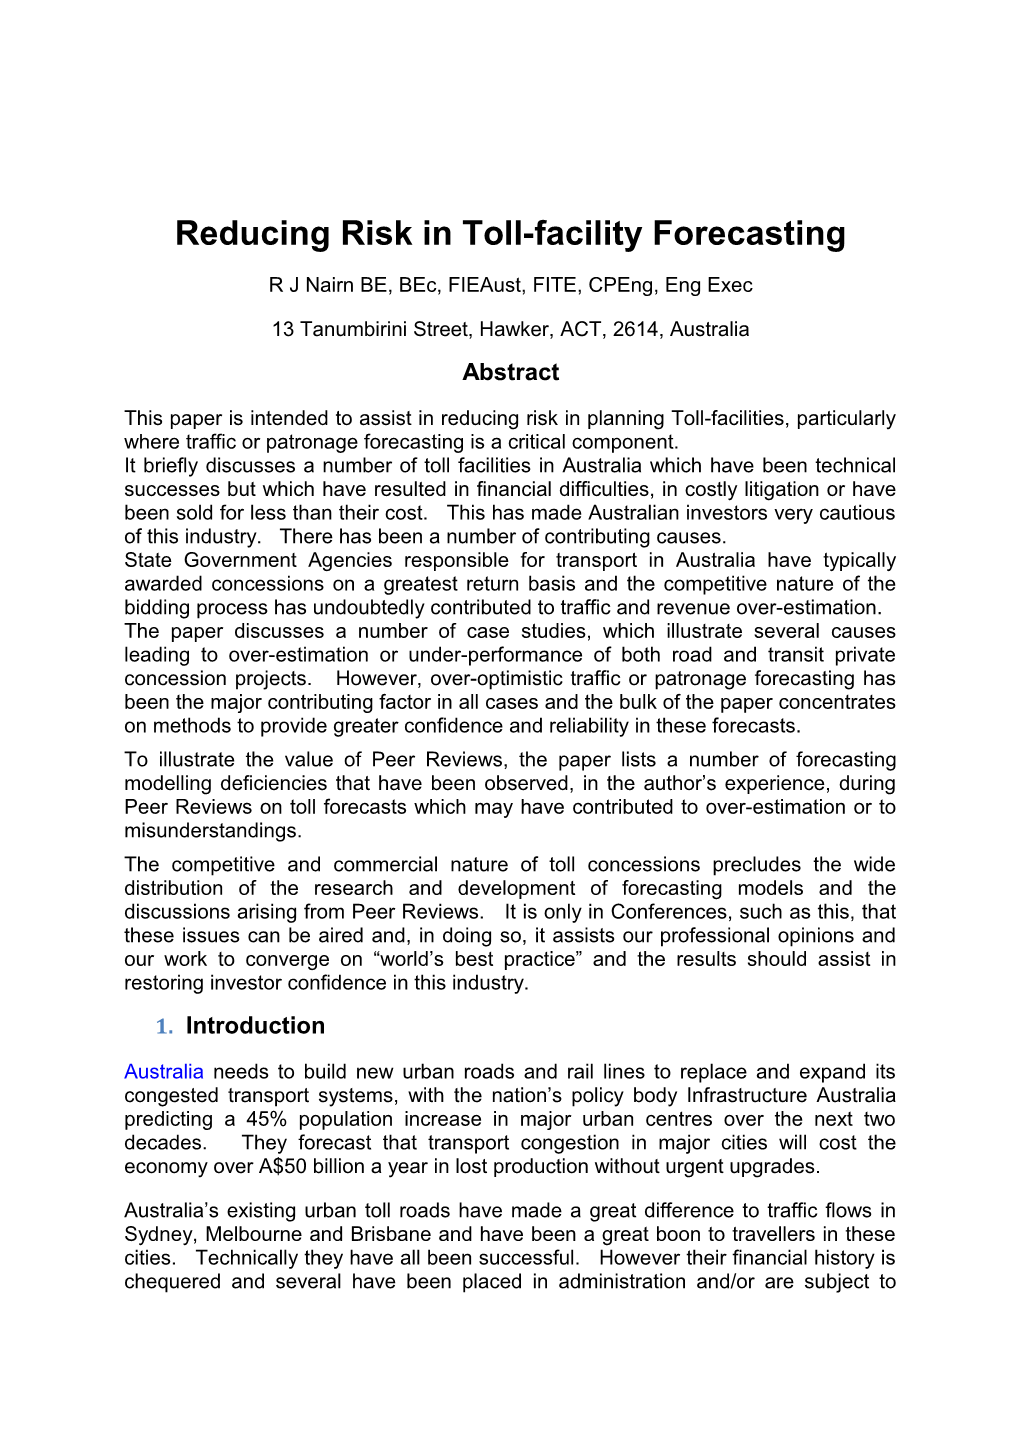 Reducing Risk in Toll-Facilityforecasting